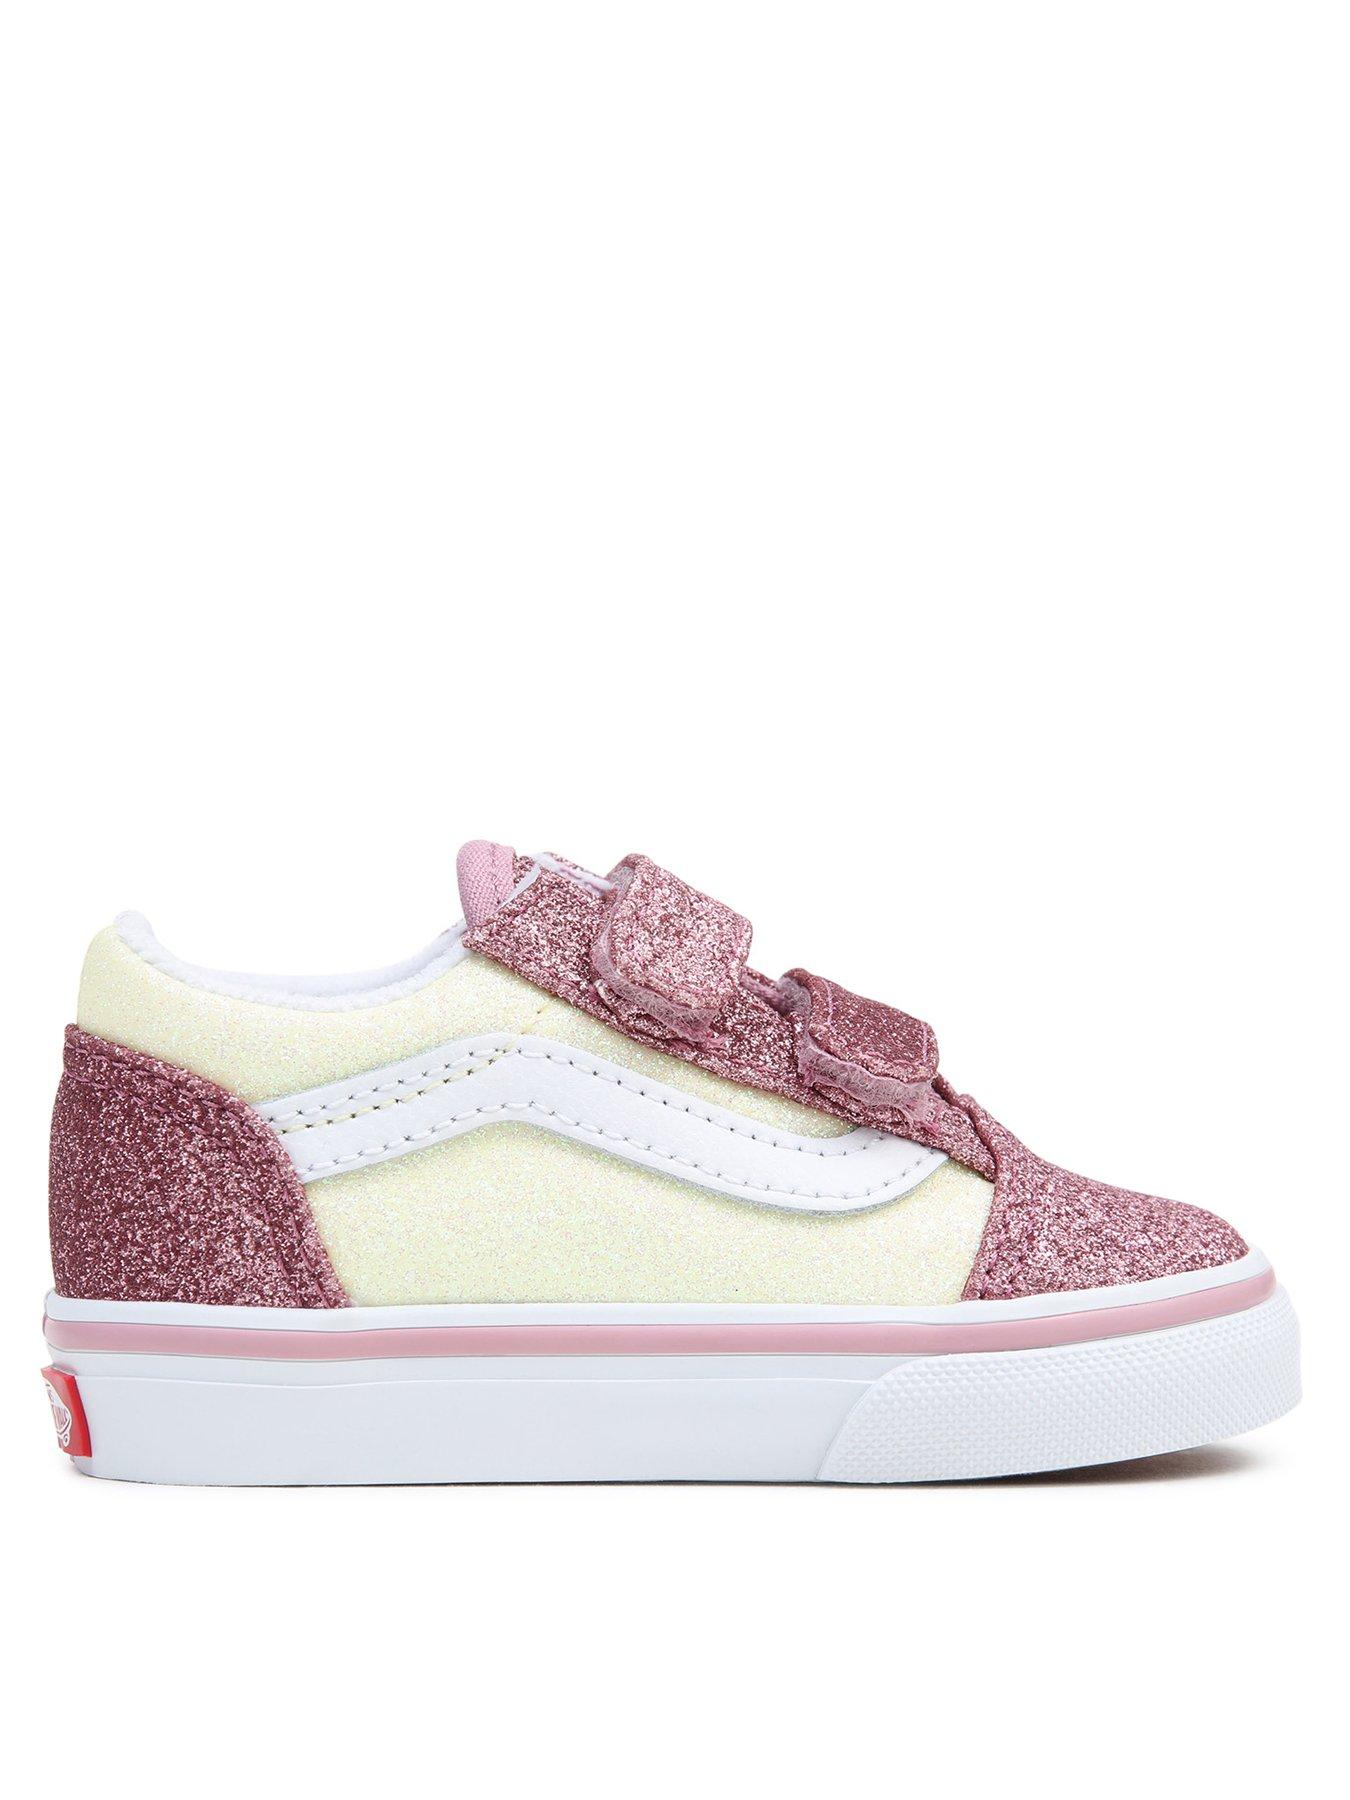 Vans Old Skool Toddler Girls Trainers Glitter-Lilac, Lilac, Size 4.5